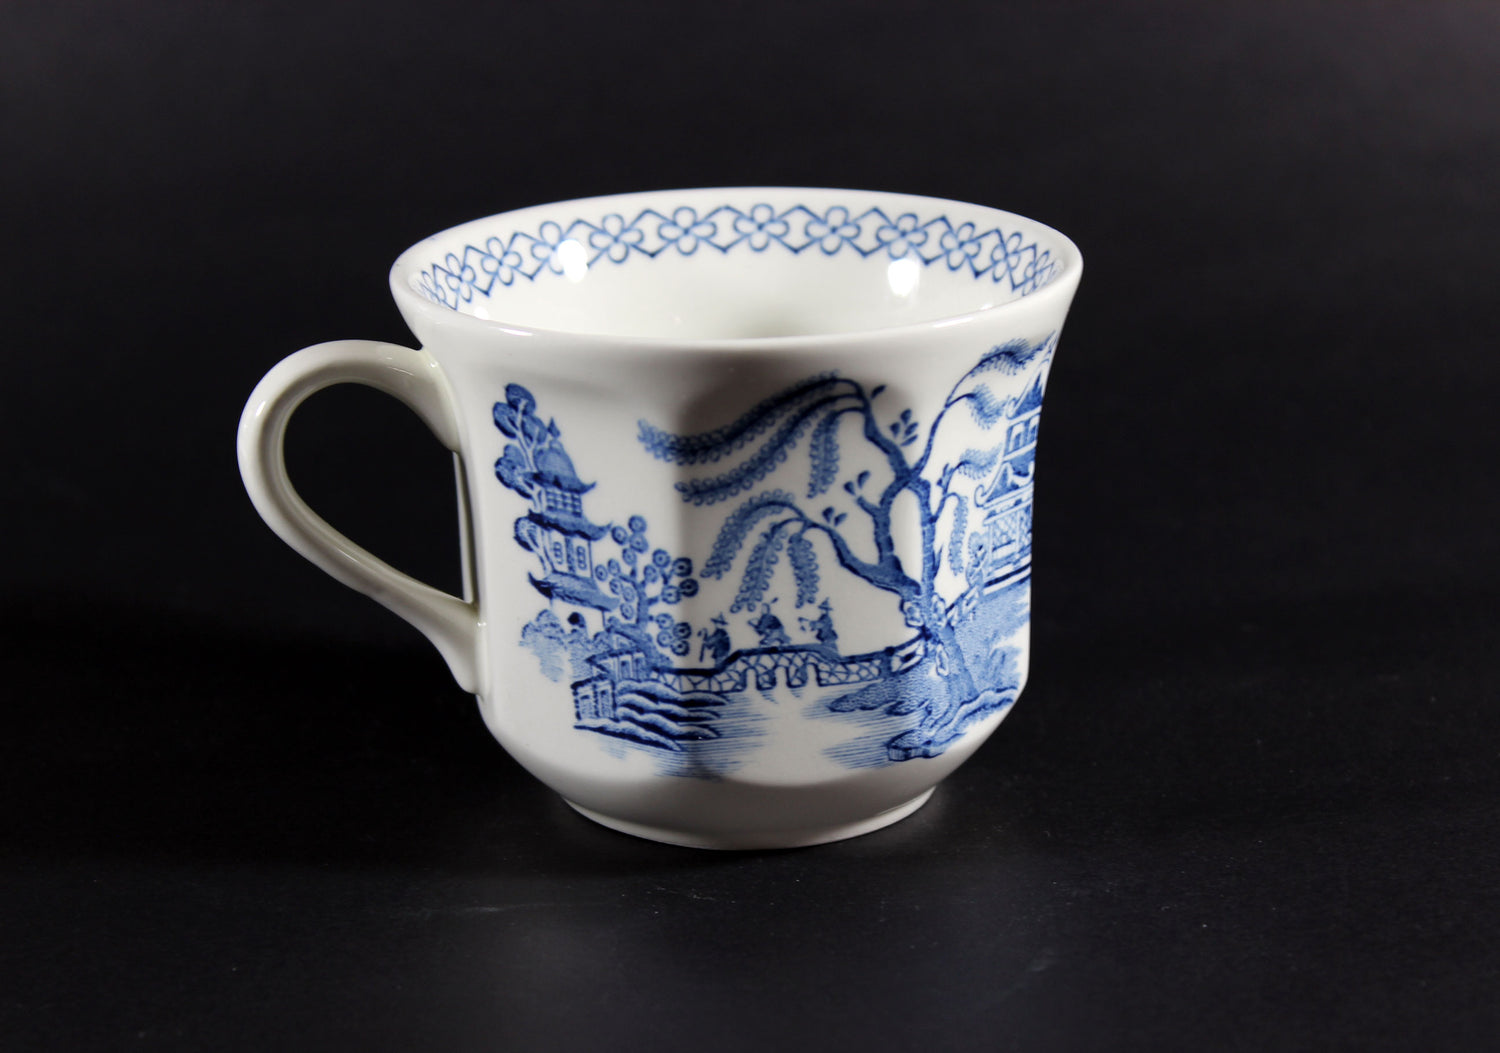 Blue Willow, Teacup, Meakin, Staffordshire